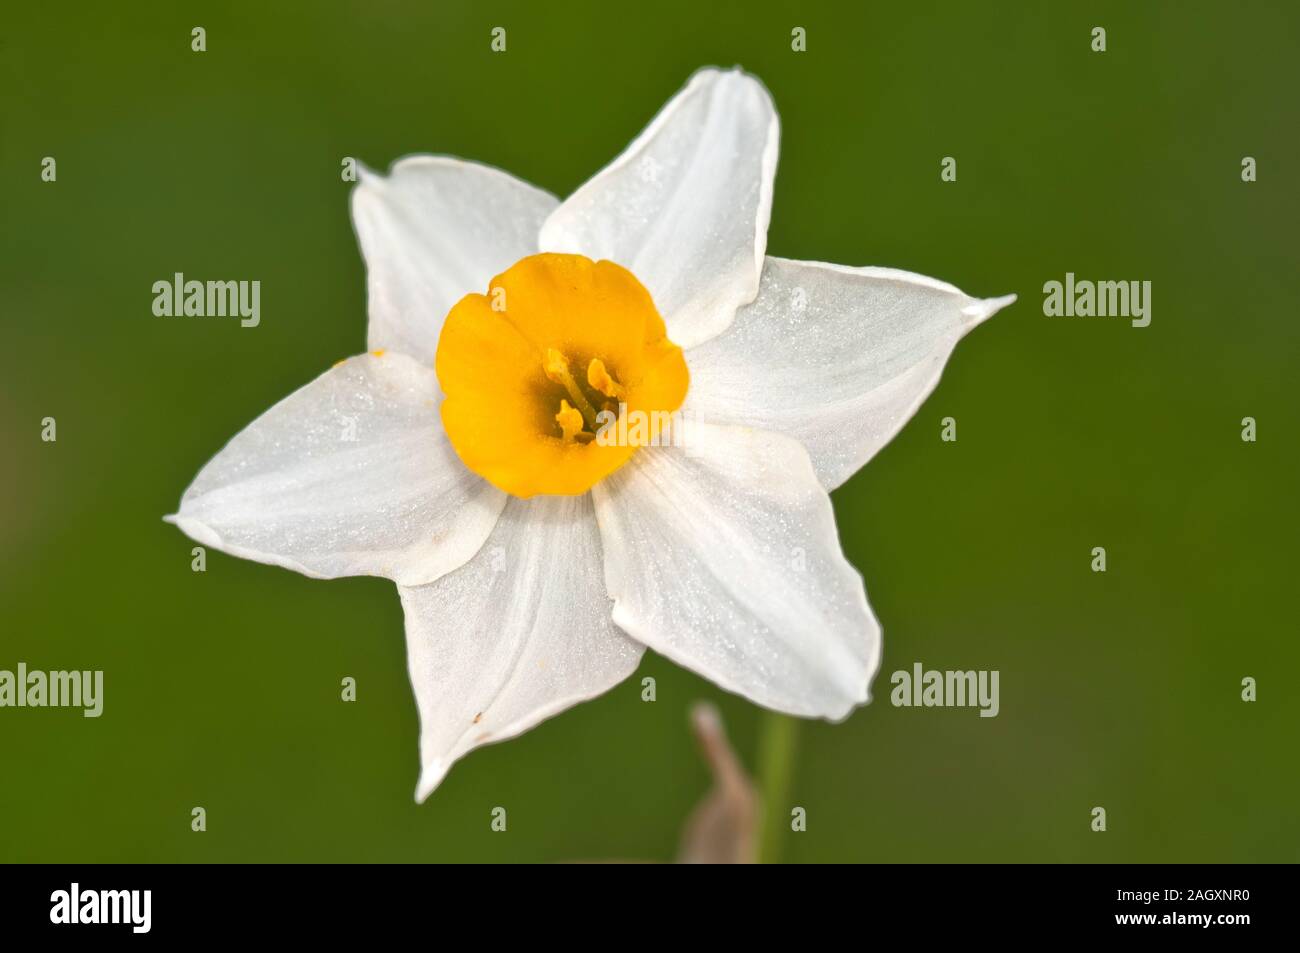 Narcissus flower in close up Stock Photo